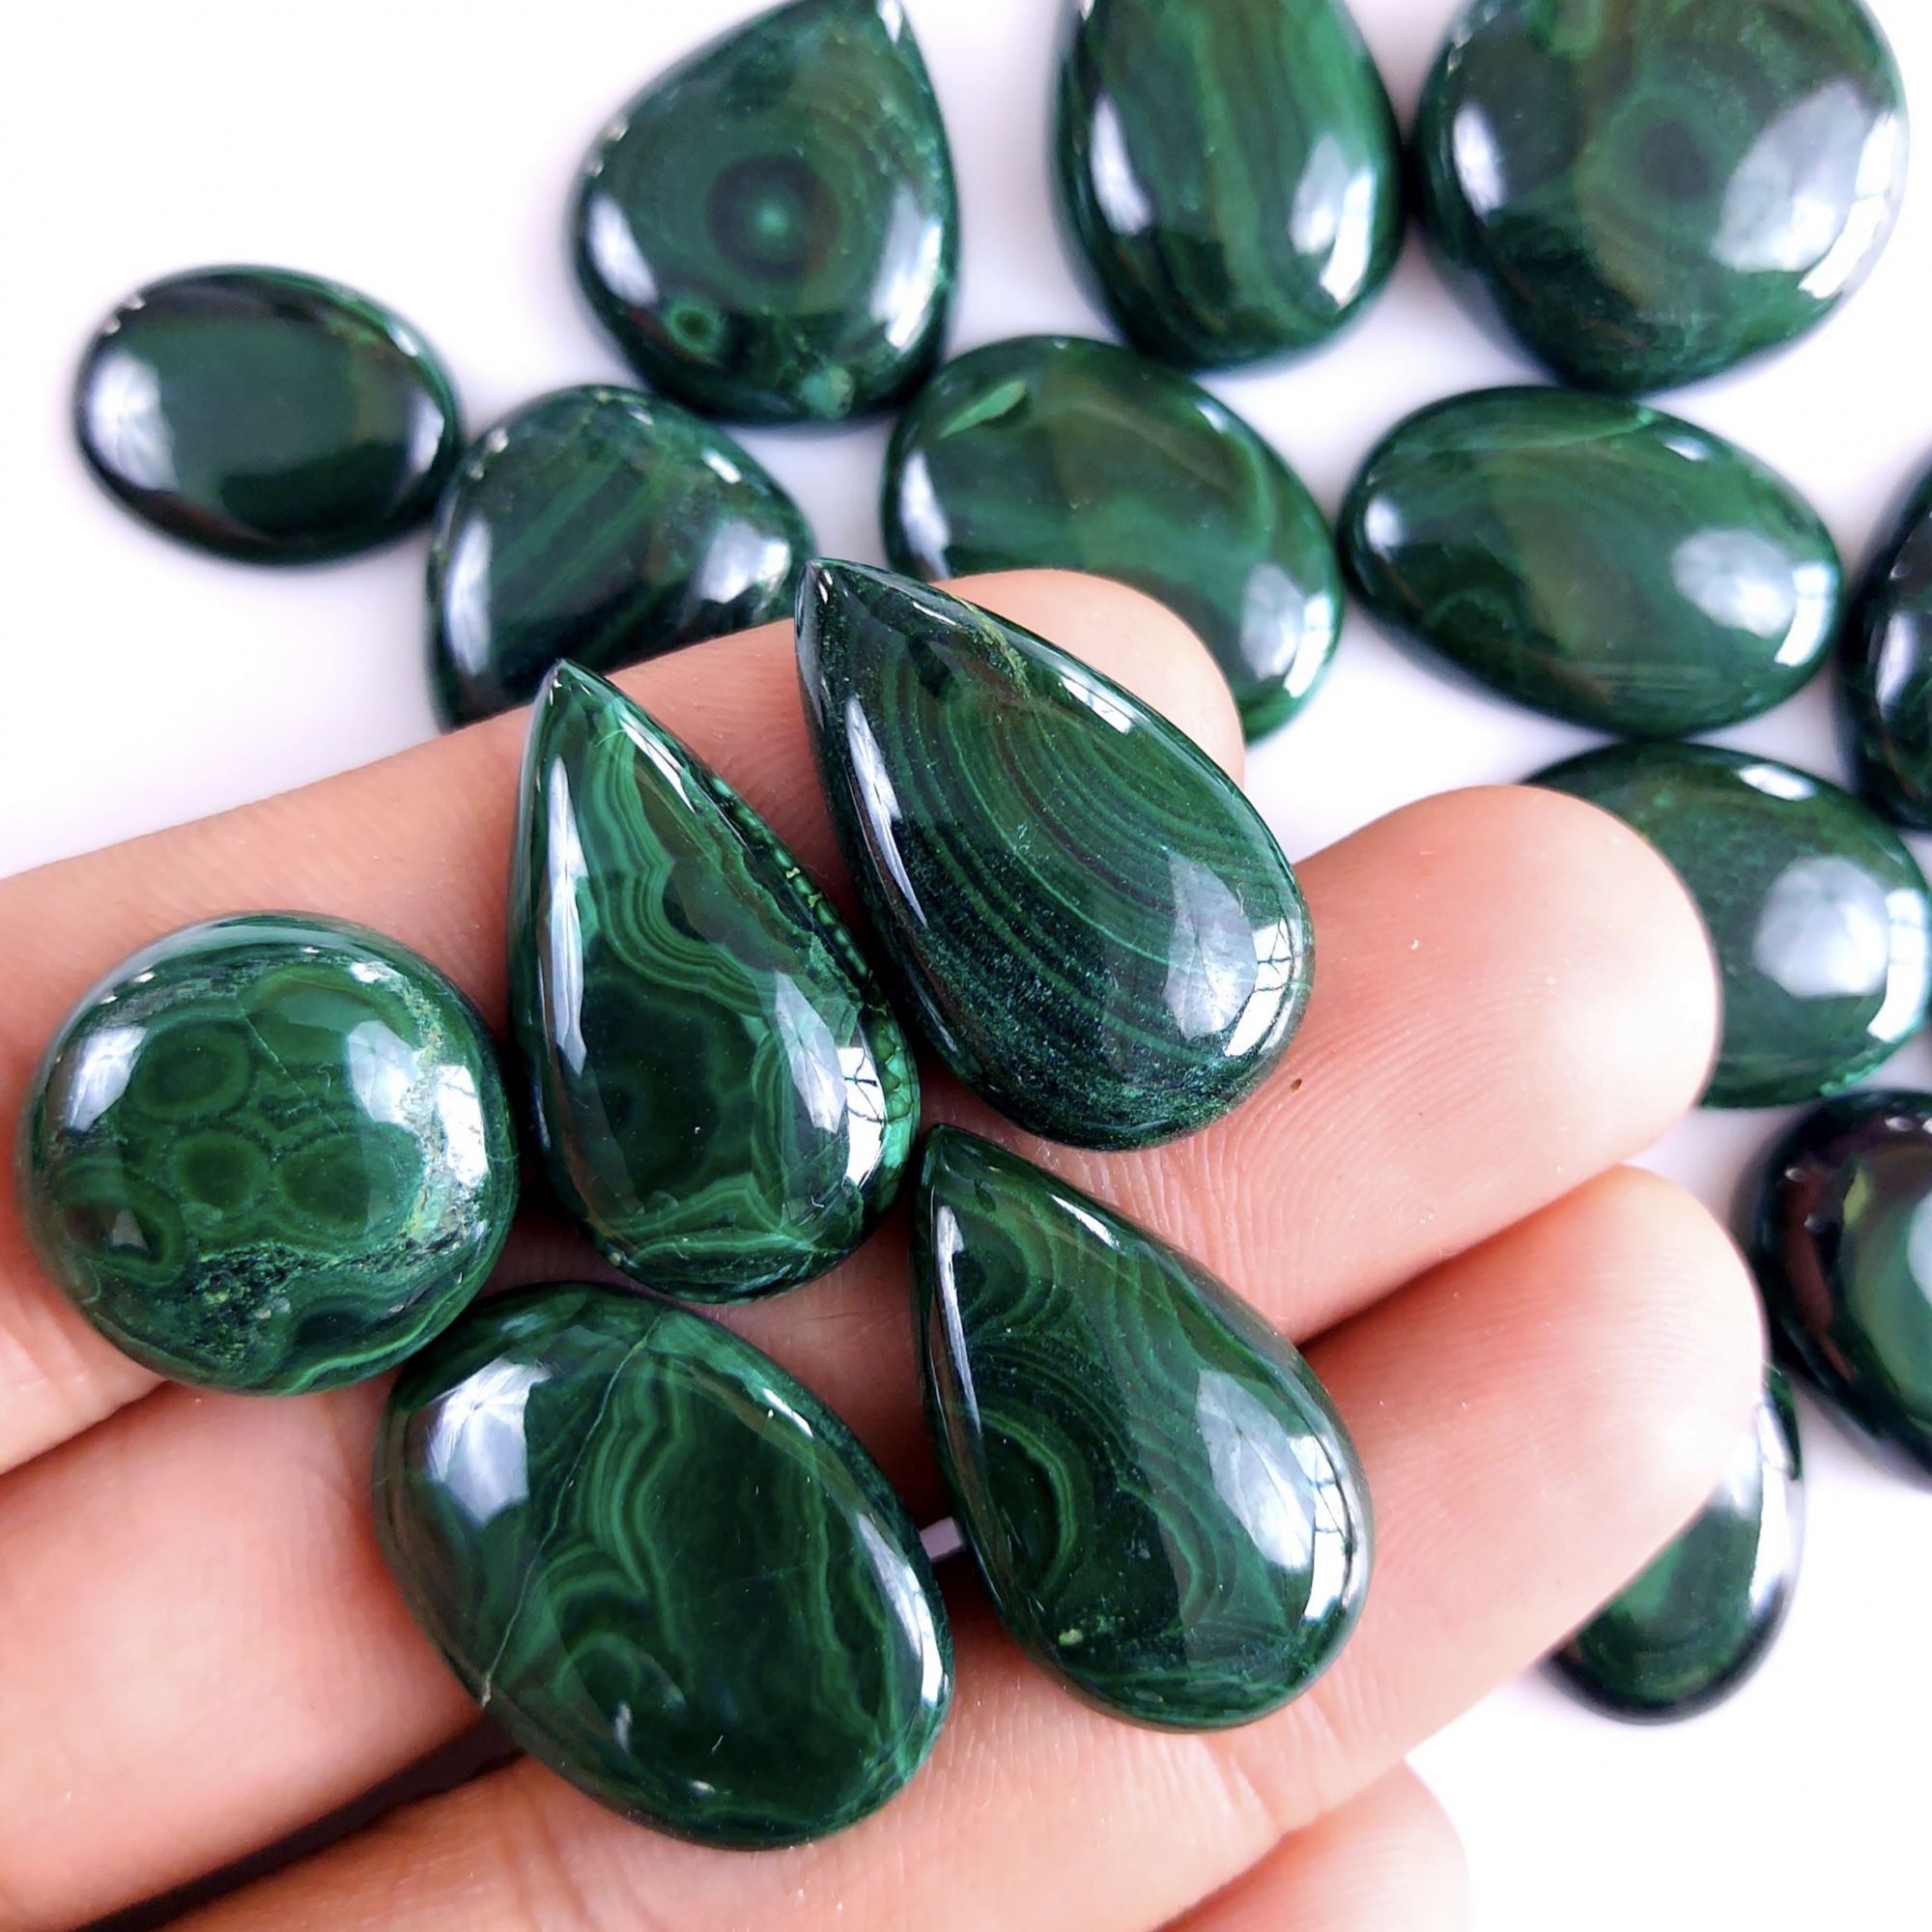 20Pcs 403Cts Natural Green Malachite Flat Back Loose Cabochon Gemstone For Handmade Jewelry Making and Craft Supplies 18x18 15x7mm#9334